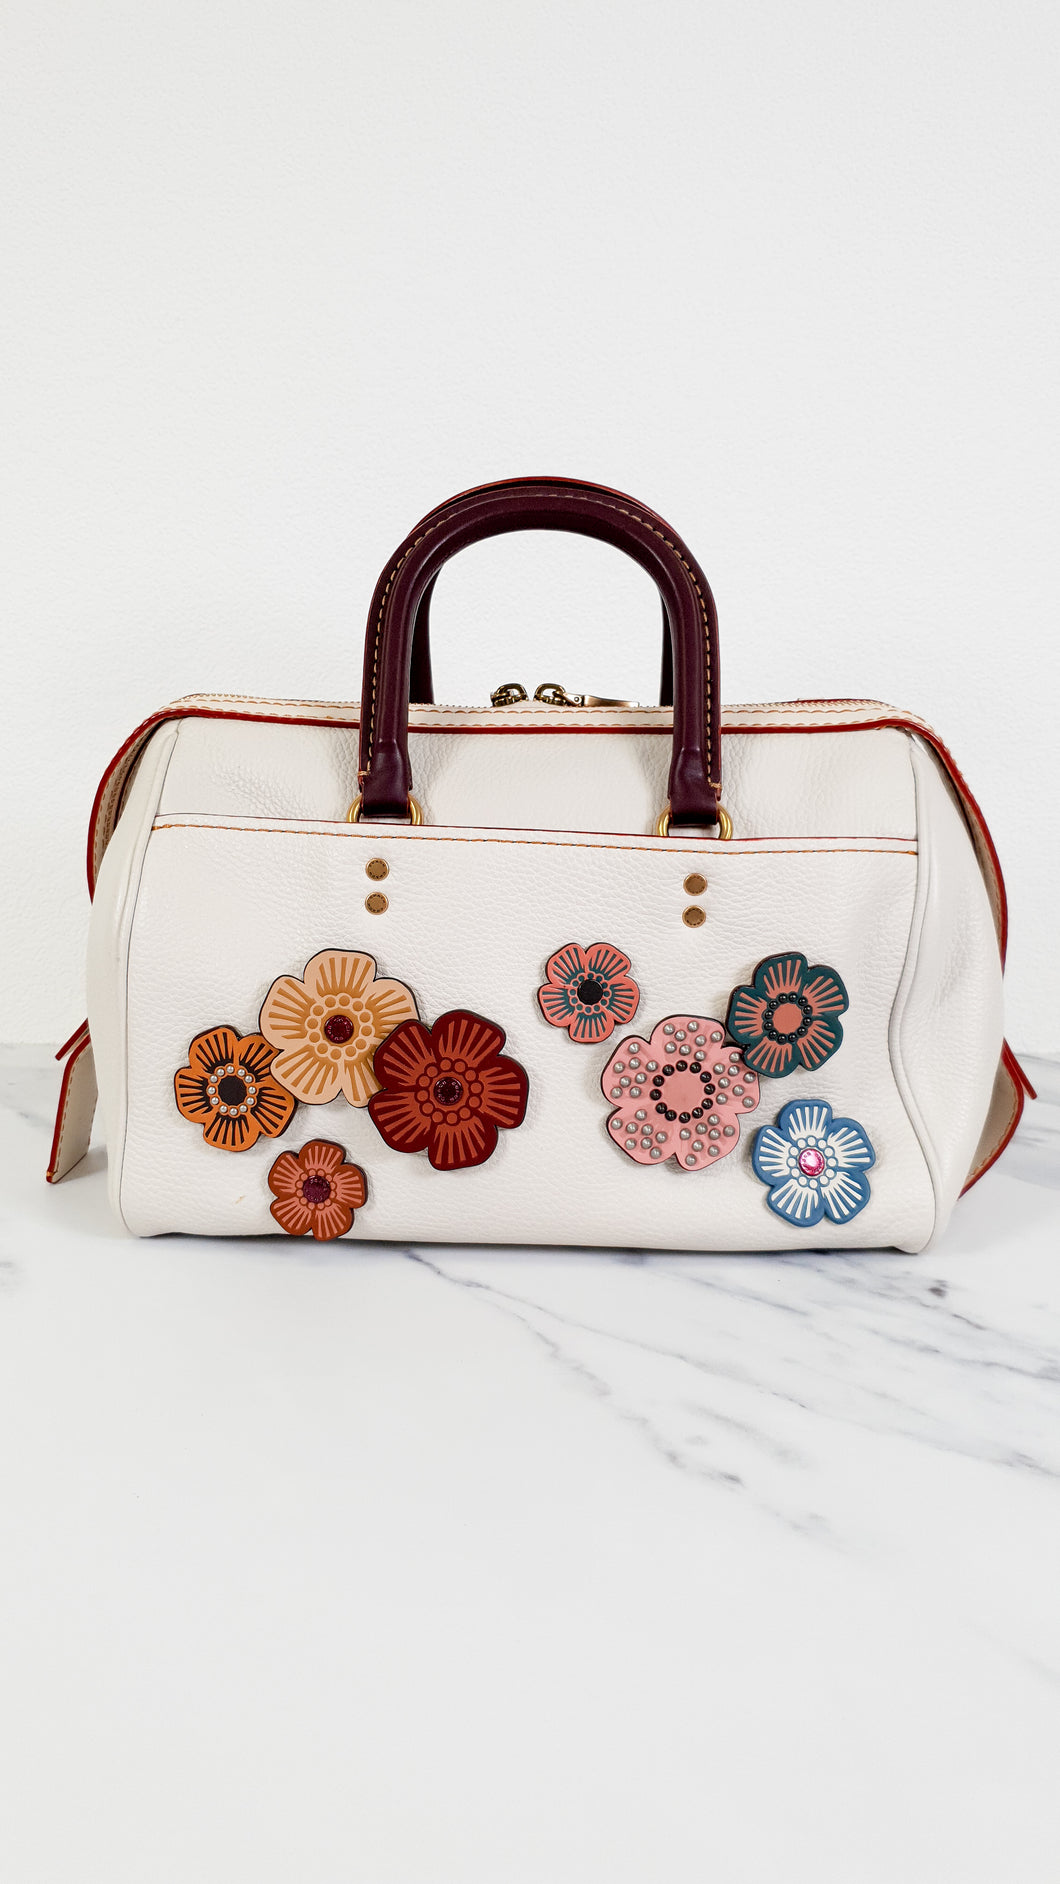 Coach 1941 Rogue Satchel in Chalk with Honey Suede and Customized Tea Roses - Barrel Bag Coach 86857